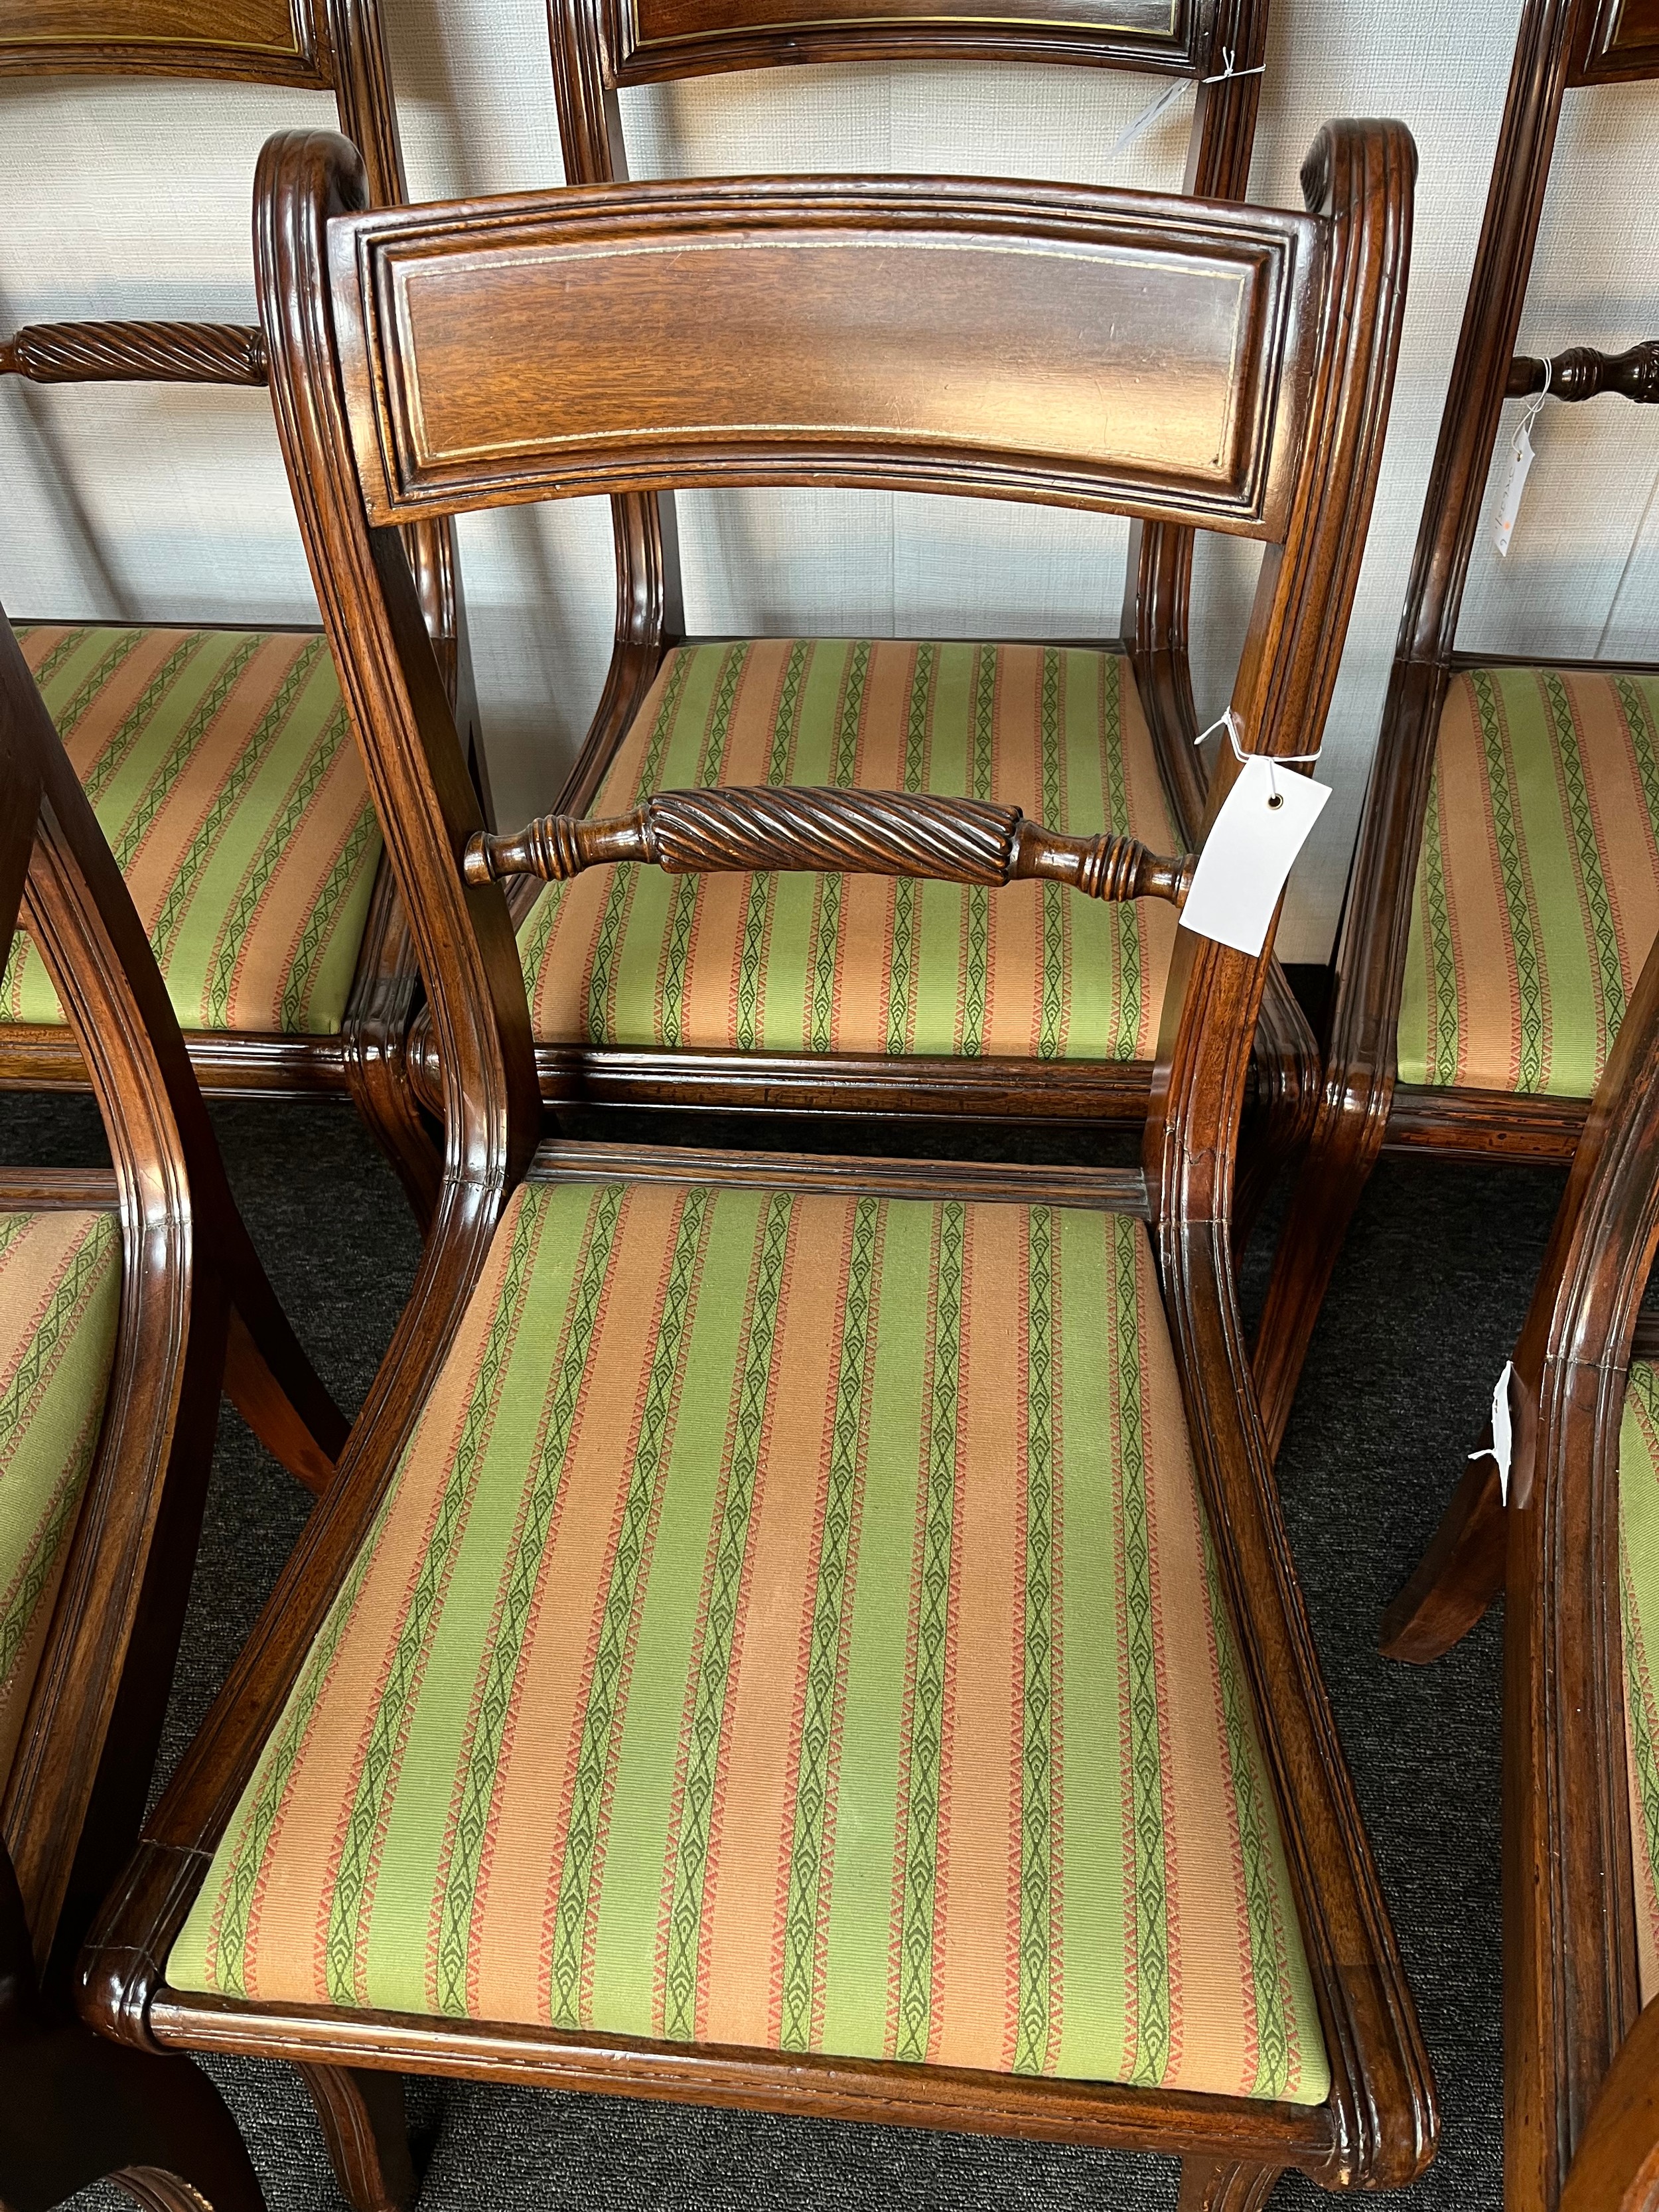 Set of six regency brass inlaid dining chairs, Early 19th century, the bar backs with brass line - Image 6 of 7